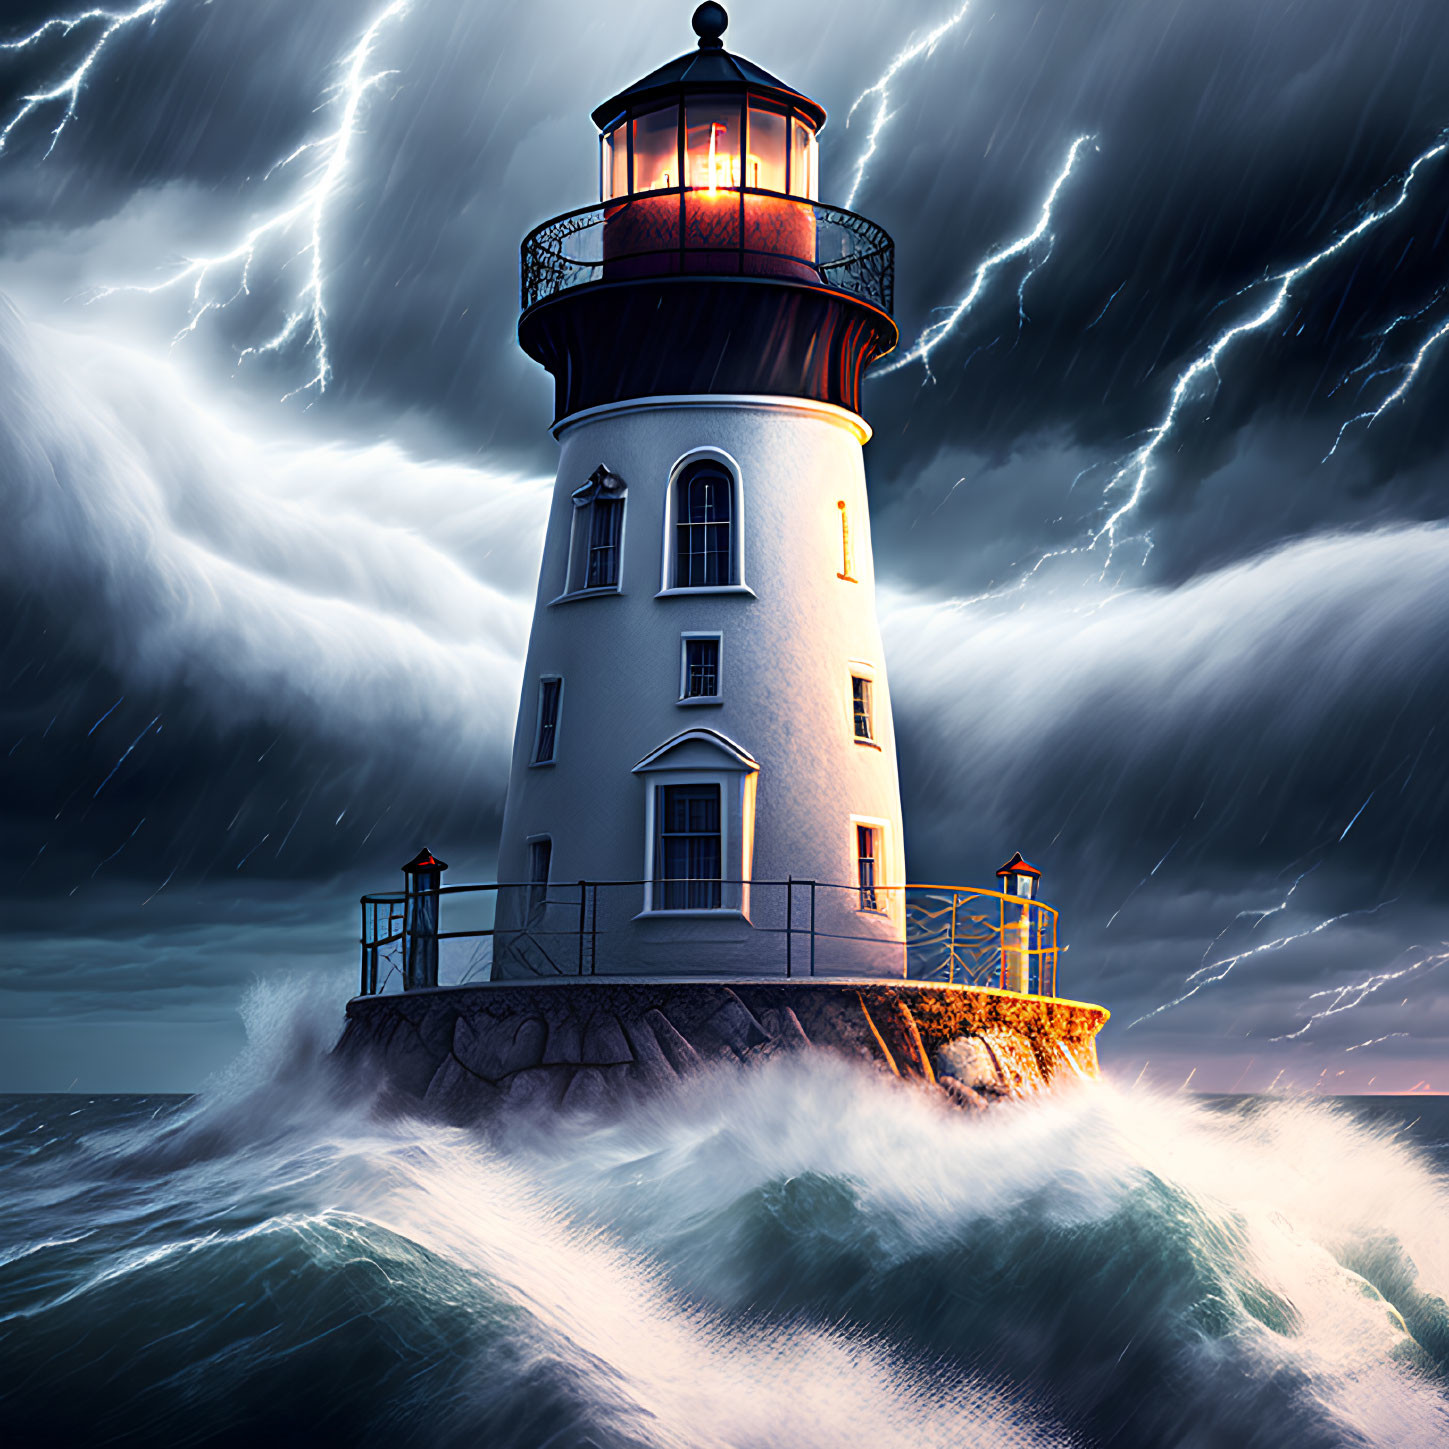 Dramatic seascape with resolute lighthouse and stormy sky